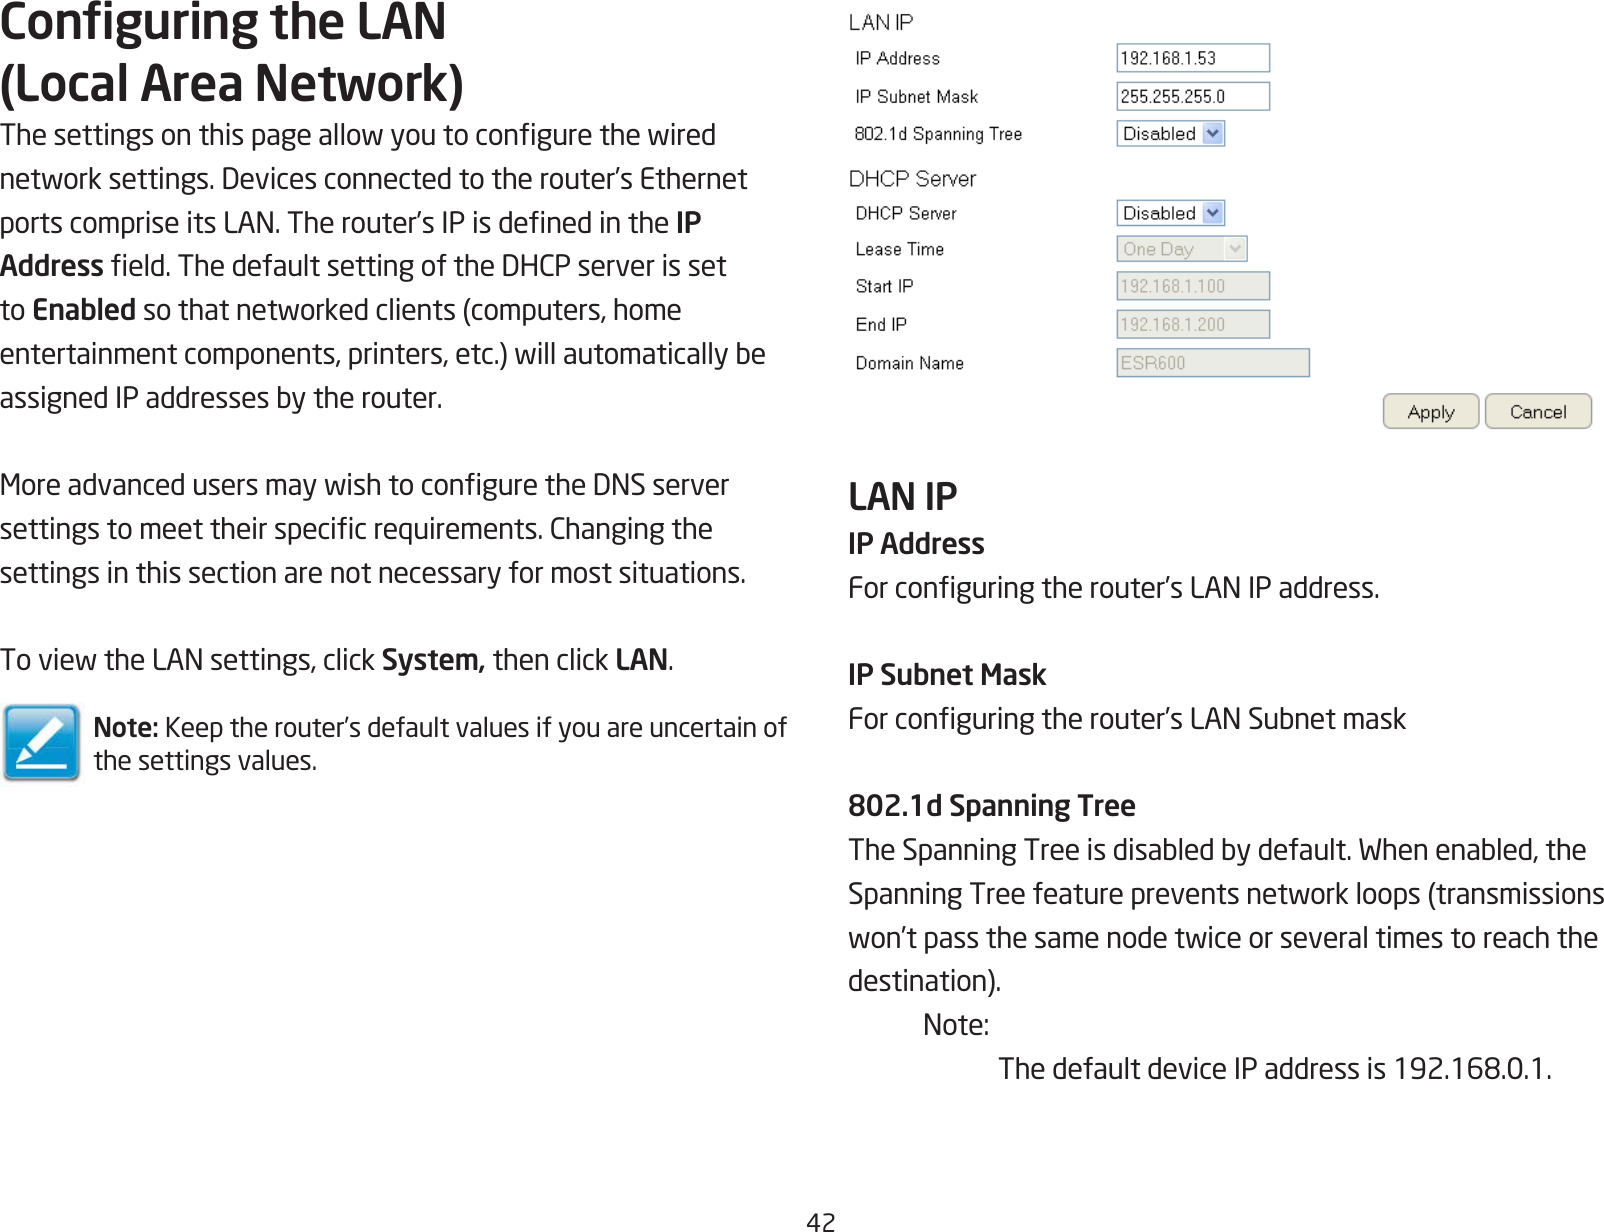 42Conguring the LAN (Local Area Network)Thesettingsonthispageallowyoutocongurethewirednetworksettings.Devicesconnectedtotherouter’sEthernetportscompriseitsLAN.Therouter’sIPisdenedintheIP Addresseld.ThedefaultsettingoftheDHCPserverissetto Enabledsothatnetworkedclients(computers,homeentertainmentcomponents,printers,etc.)willautomaticallybeassignedIPaddressesbytherouter.MoreadvancedusersmaywishtoconguretheDNSserversettingstomeettheirspecicrequirements.Changingthesettings in this section are not necessary for most situations.ToviewtheLANsettings,clickSystem, then click LAN.Note: Keep the router’s default values if you are uncertain of the settings values.LAN IP IP AddressForconguringtherouter’sLANIPaddress.IP Subnet MaskForconguringtherouter’sLANSubnetmask802.1d Spanning TreeTheSpanningTreeisdisabledbydefault.Whenenabled,theSpanningTreefeaturepreventsnetworkloops(transmissionswon’tpassthesamenodetwiceorseveraltimestoreachthedestination). Note:  ThedefaultdeviceIPaddressis192.168.0.1.